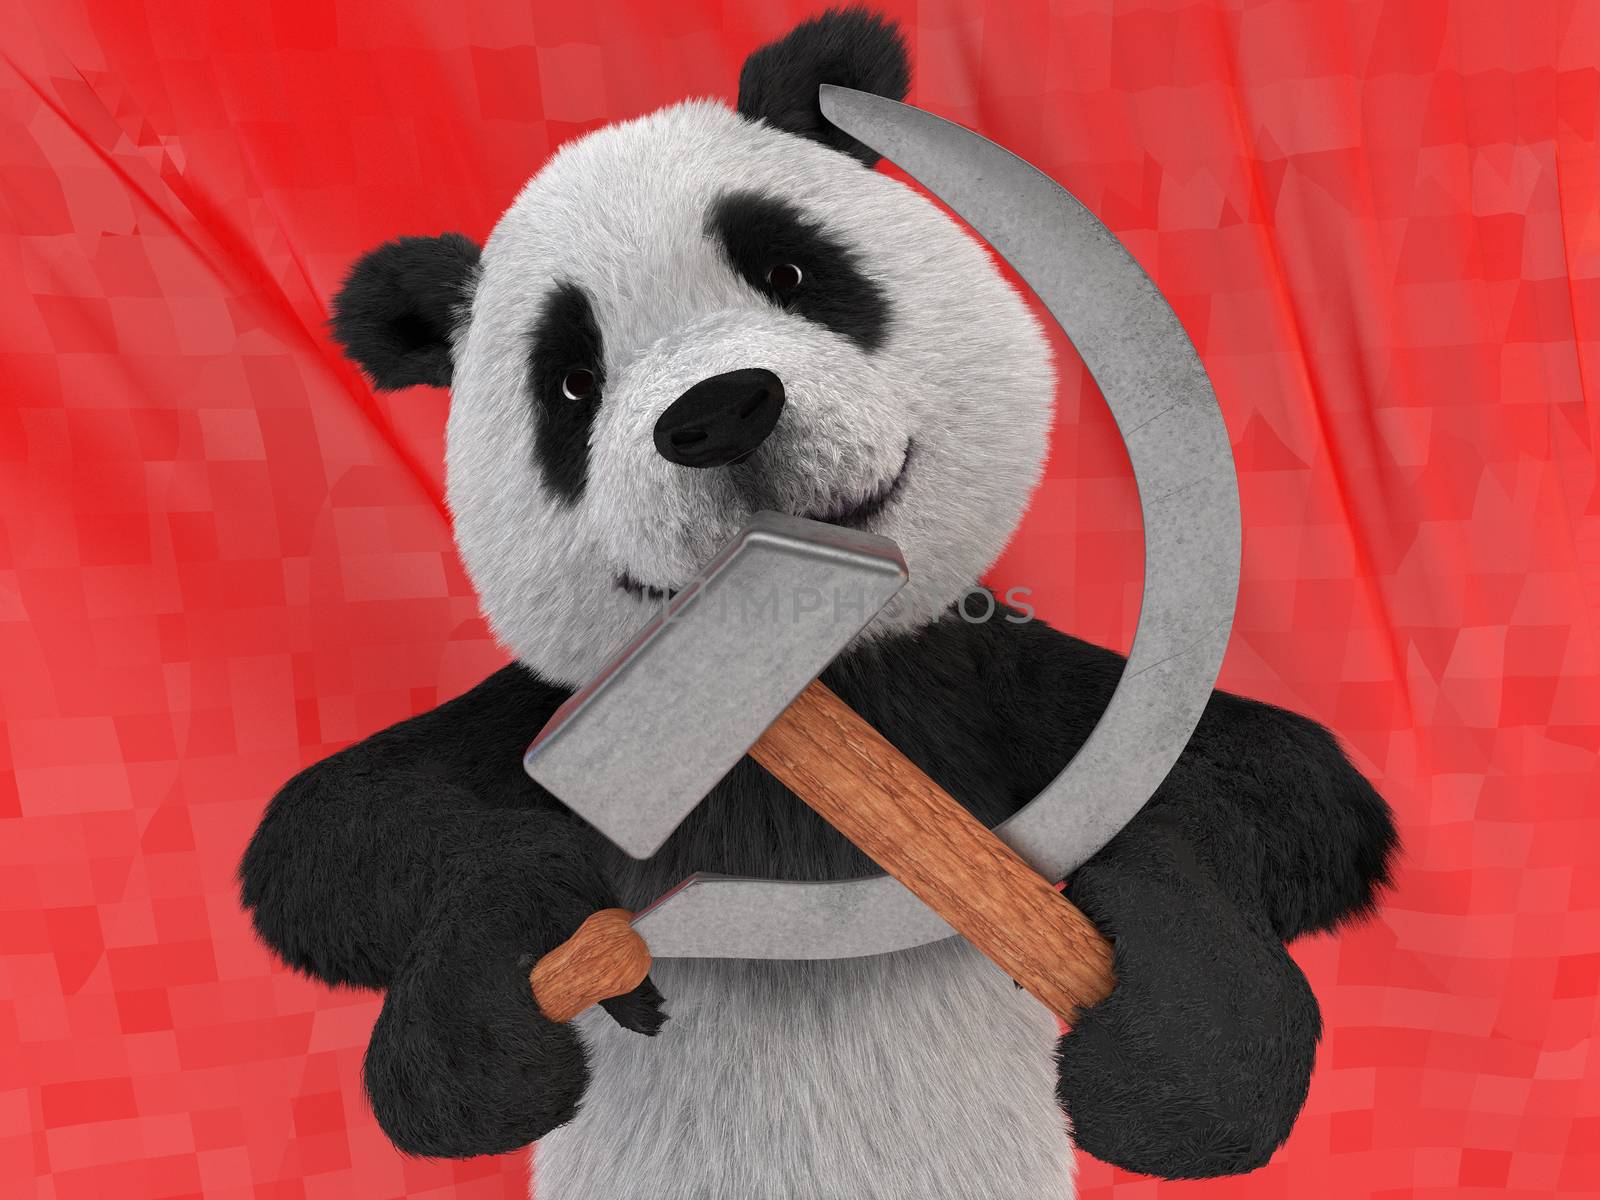 maniacal kind of character in black-and-white Chinese panda, also referred to as bamboo bear holding in its paws symbols of the communist parties of world hammer and sickle on red background flag